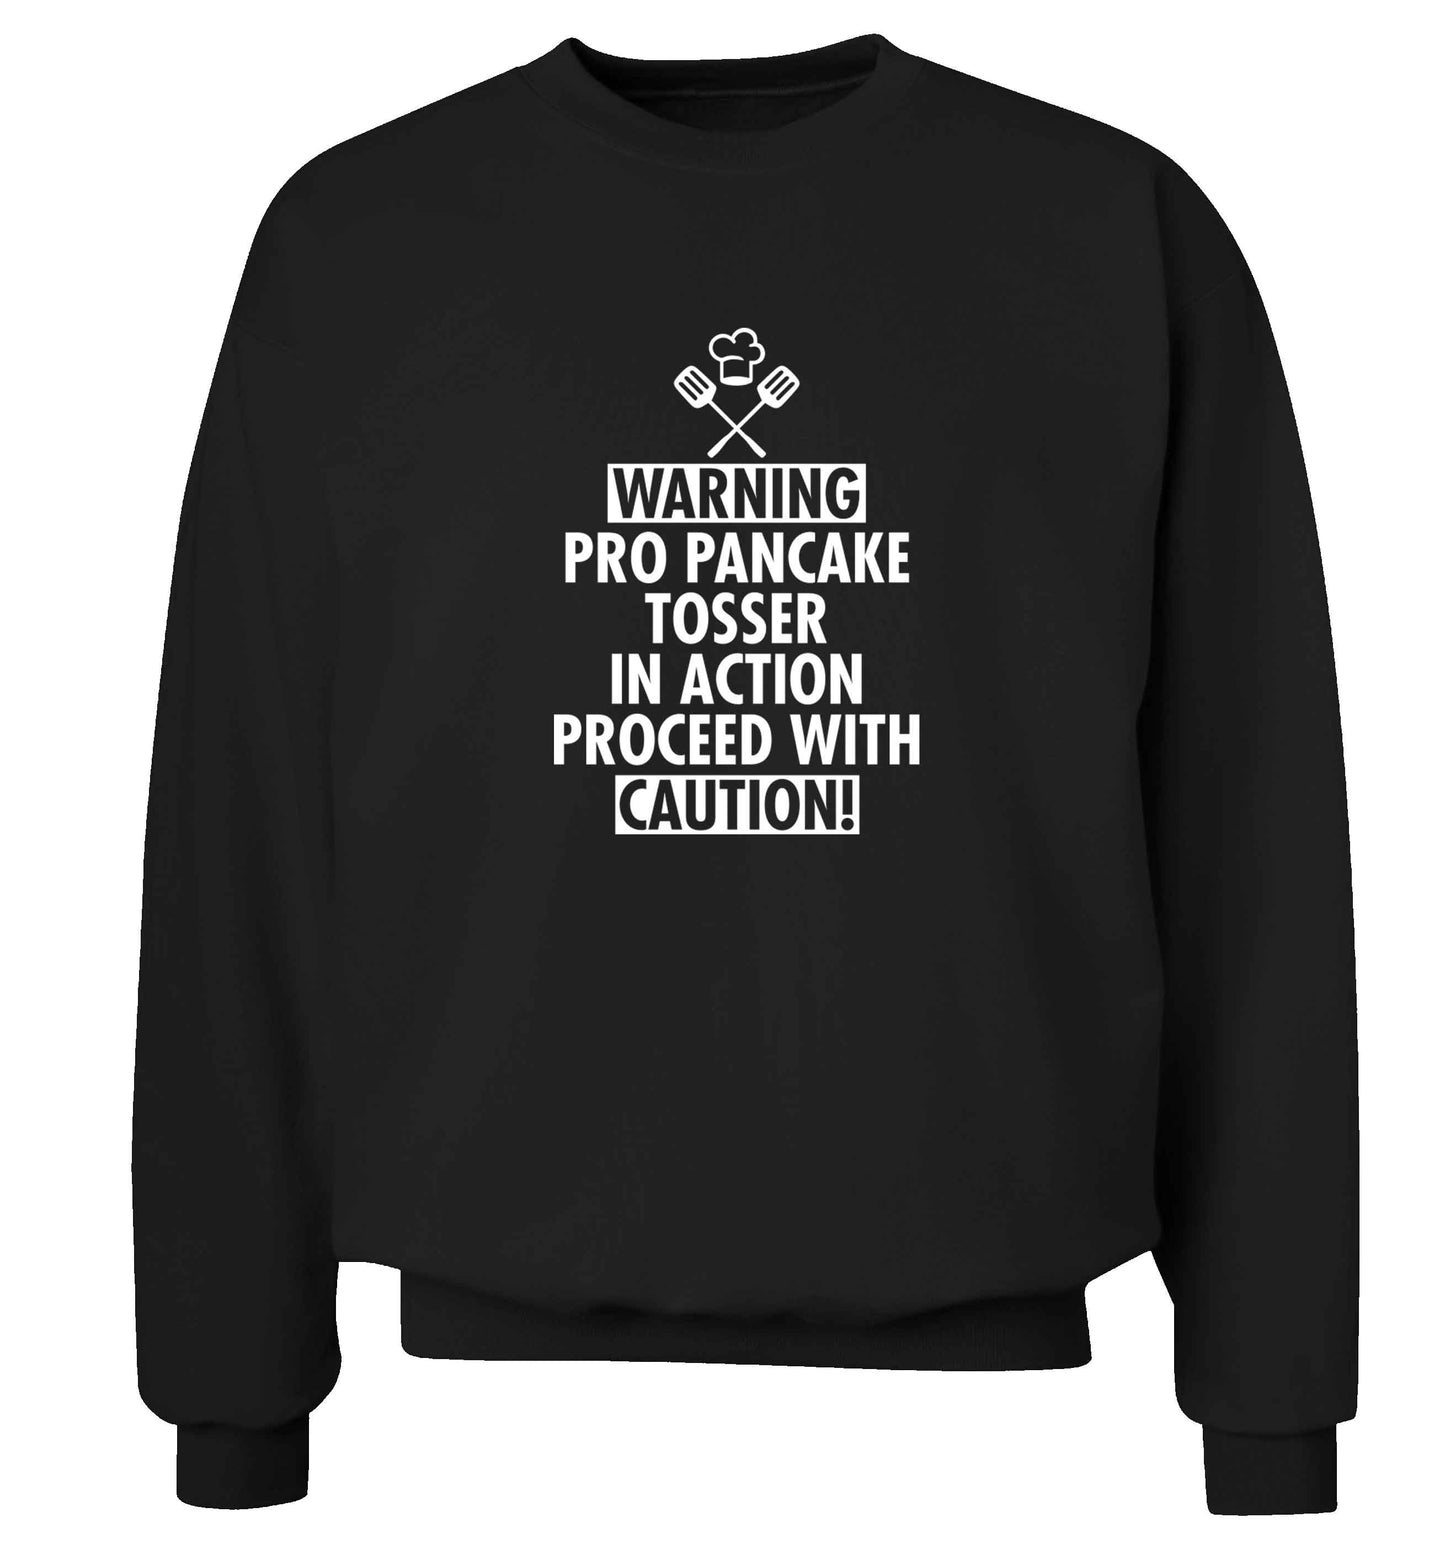 Warning pro pancake tosser in action proceed with caution adult's unisex black sweater 2XL